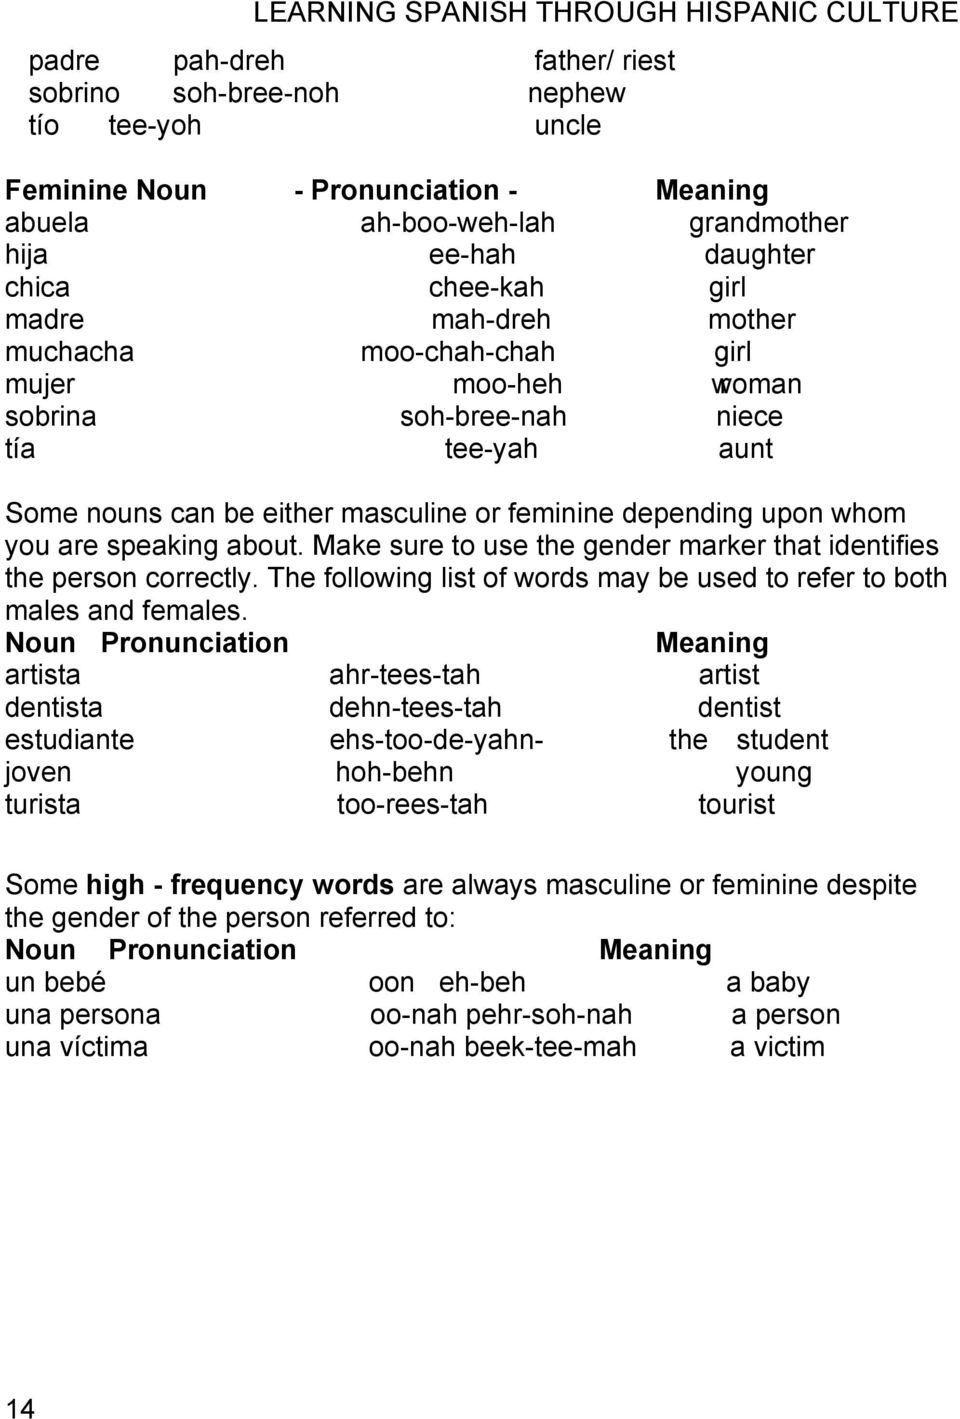 Make sure to use the gender marker that identifies the person correctly. The following list of words may be used to refer to both males and females.